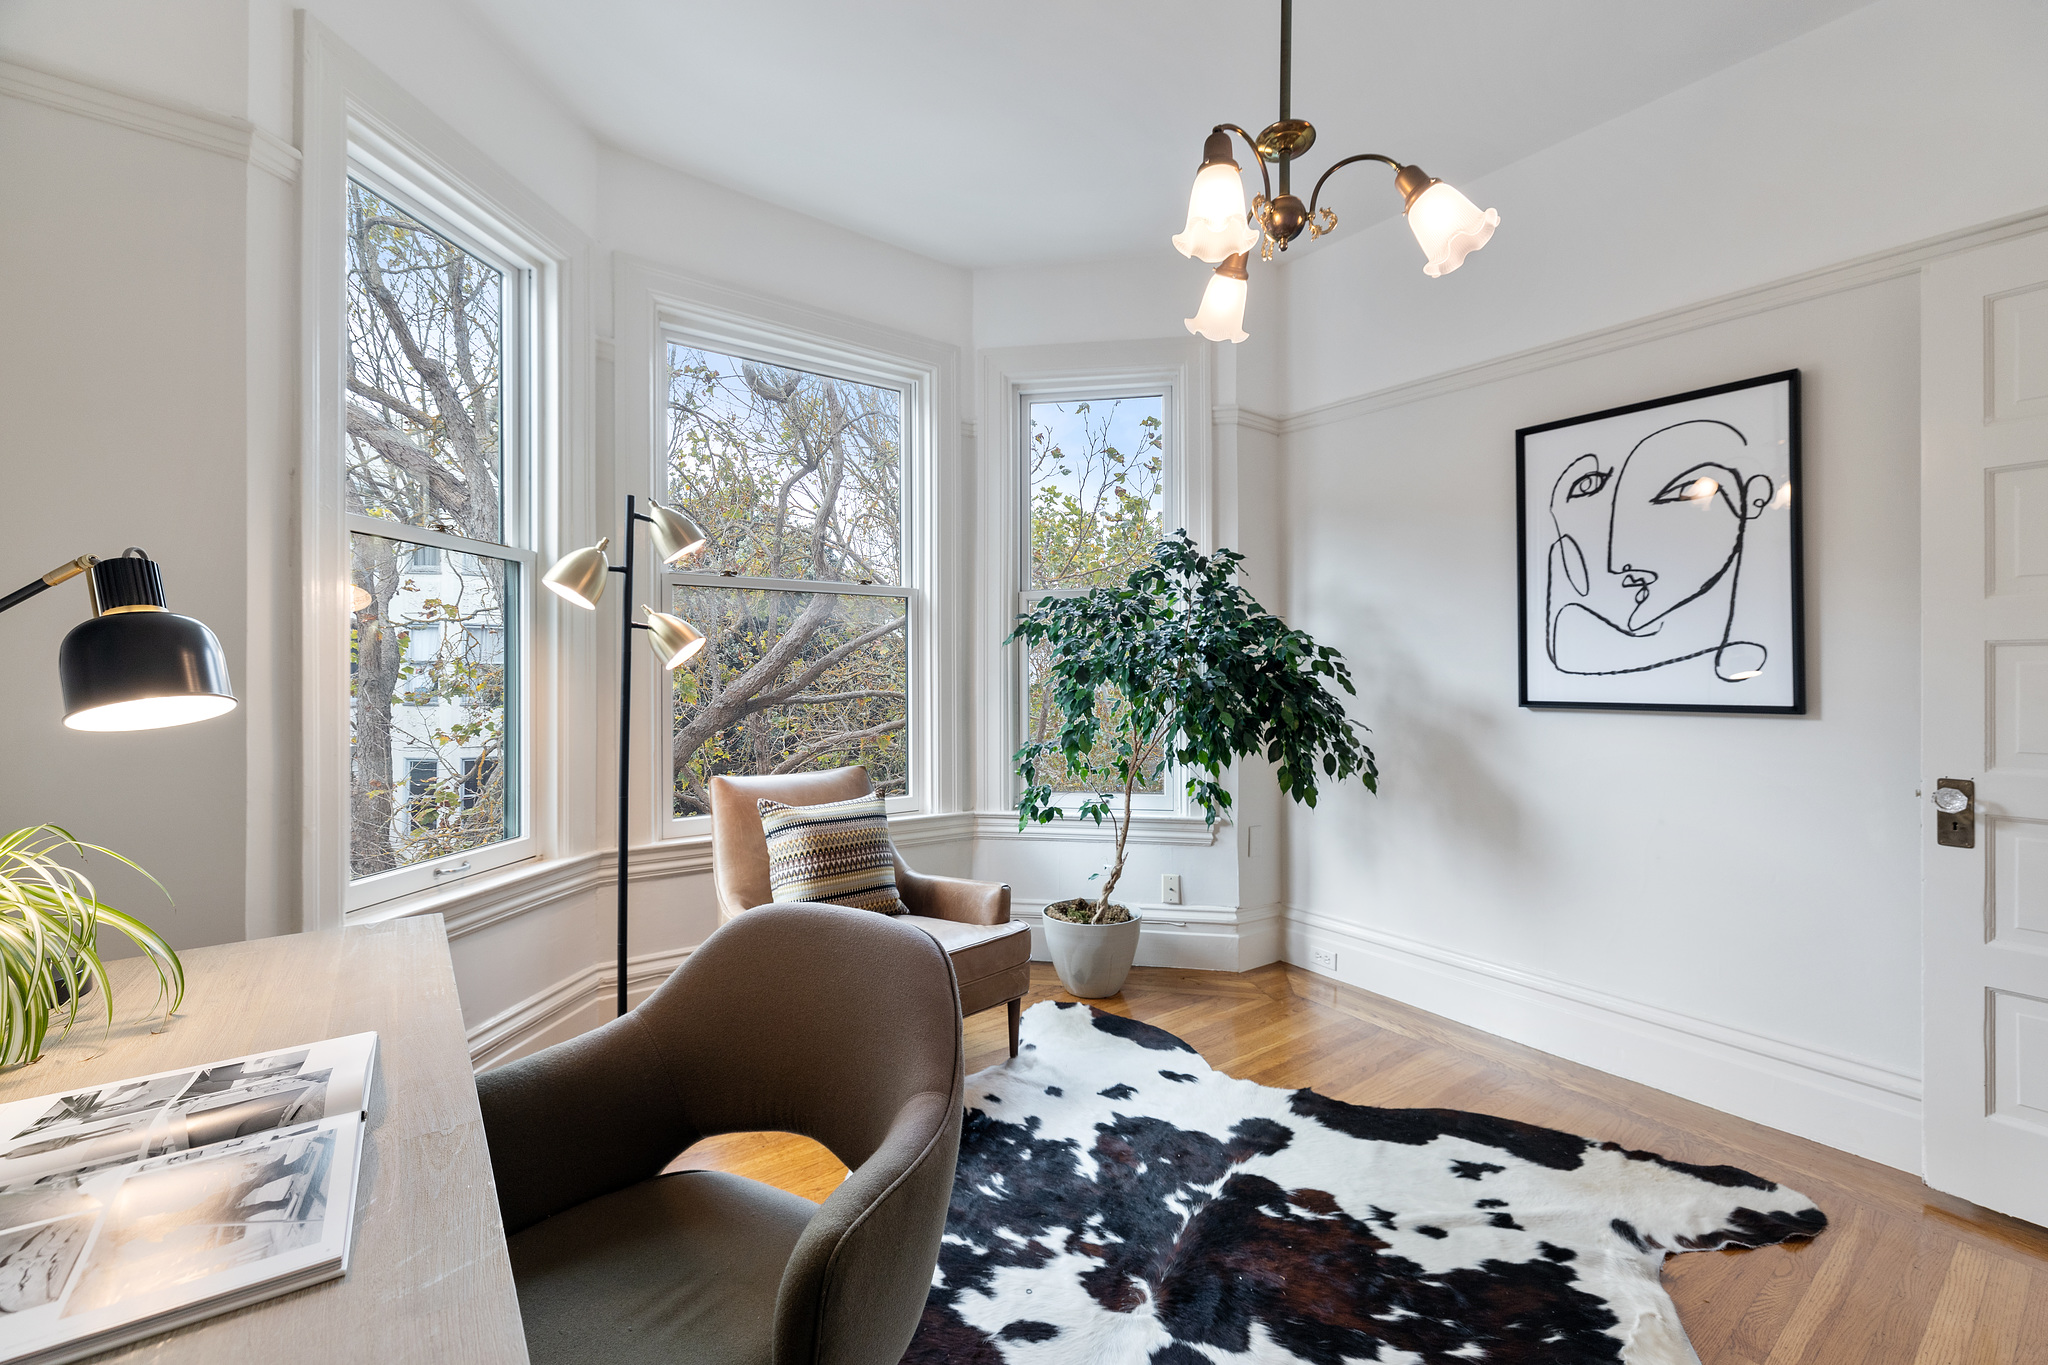 Property Photo: Large windows and artwork adorn the walls of 726 Clayton Street